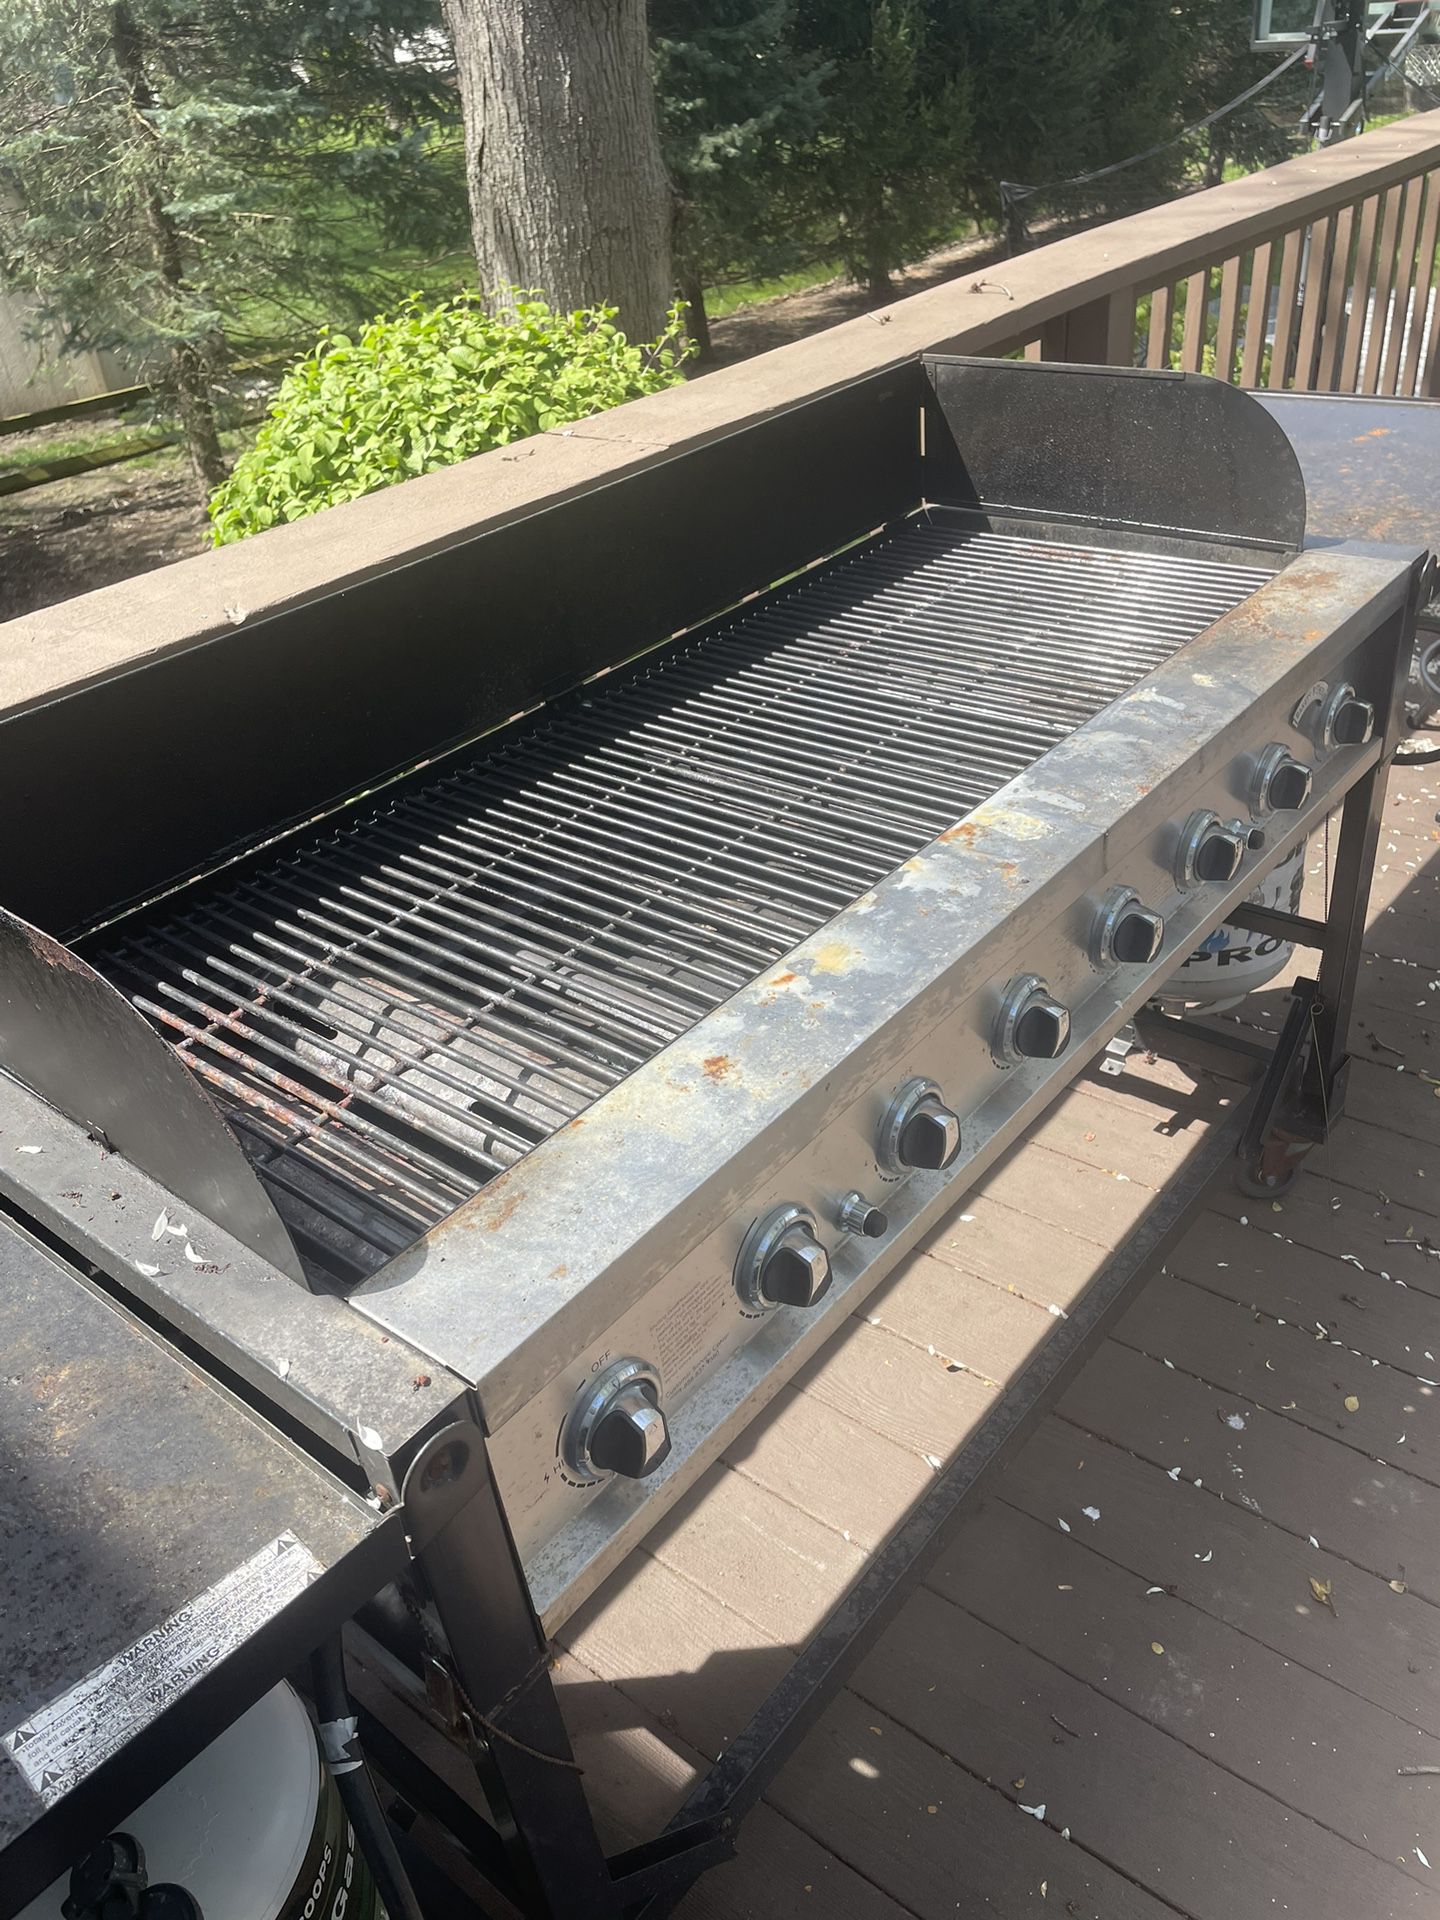 Bakers & Chefs 8 Burner Gas Event Grill